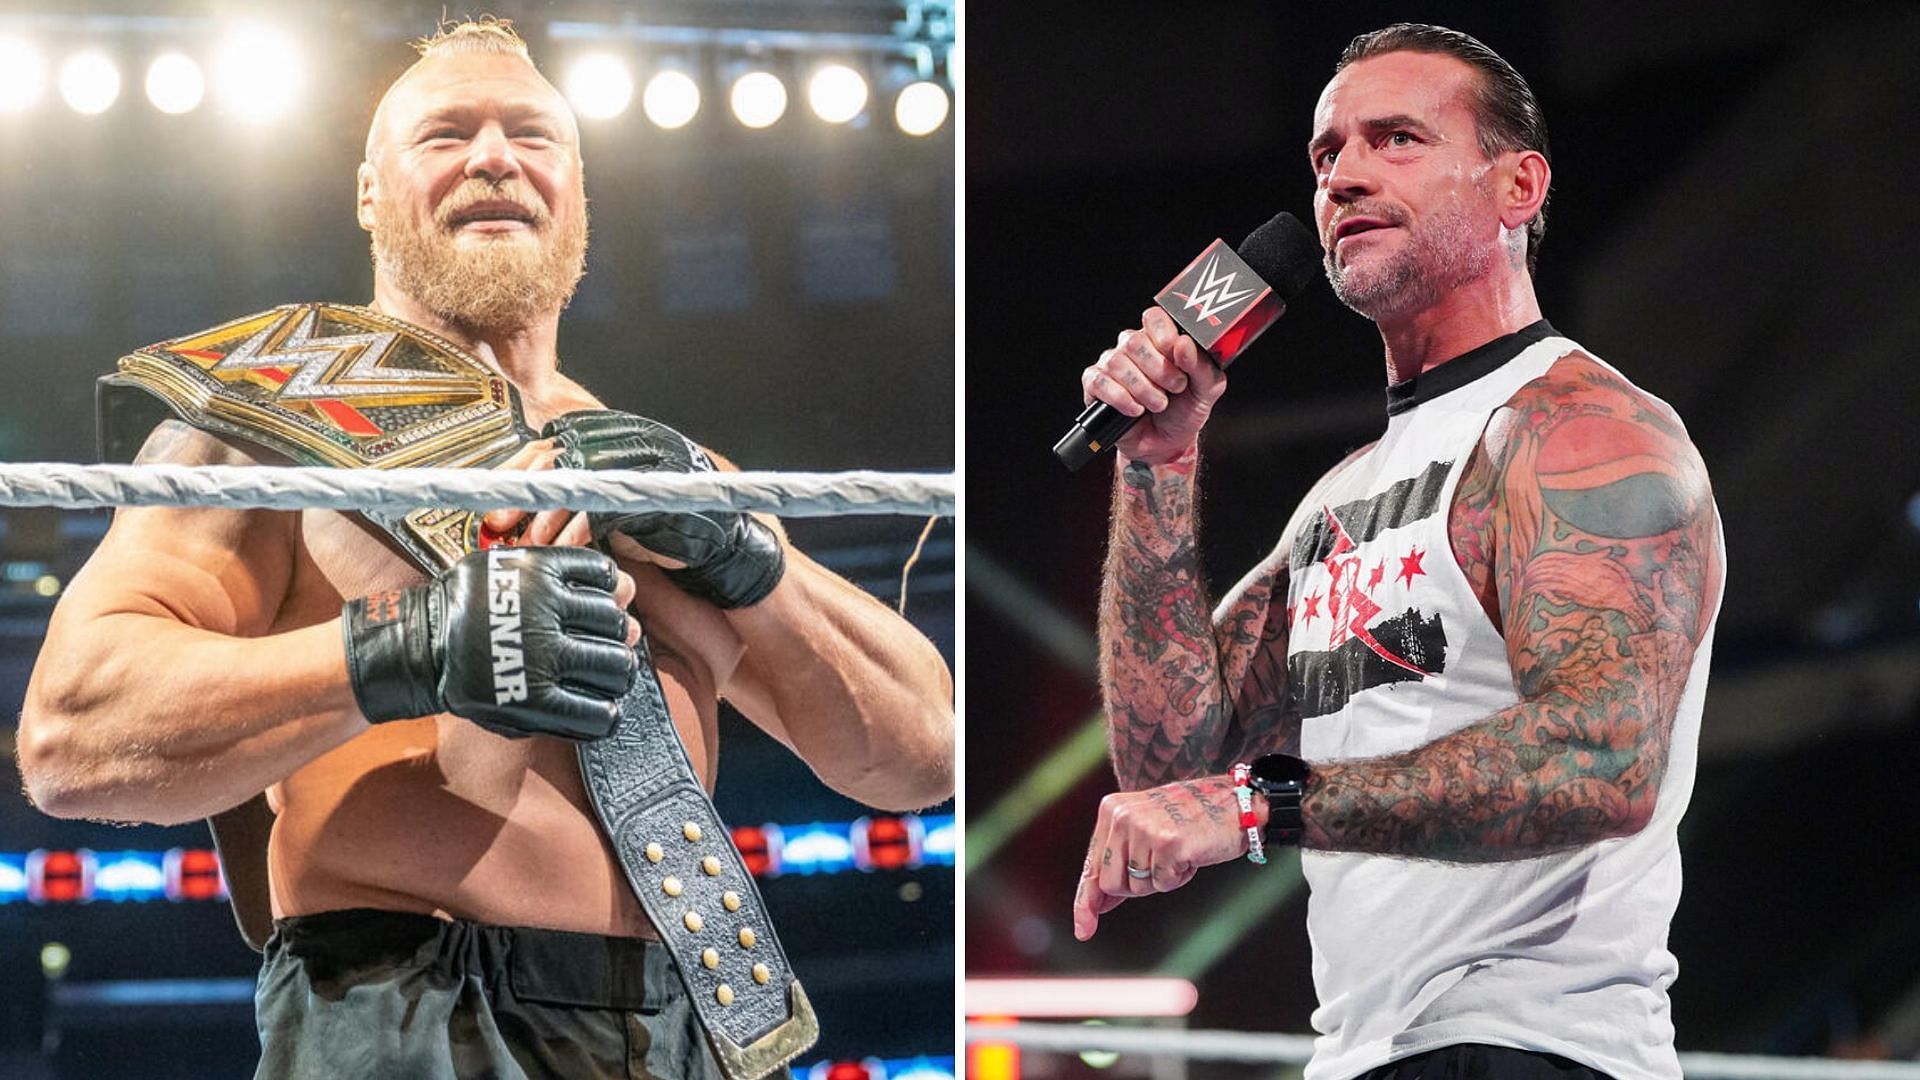 Both Brock Lesnar and CM Punk had spells in the UFC